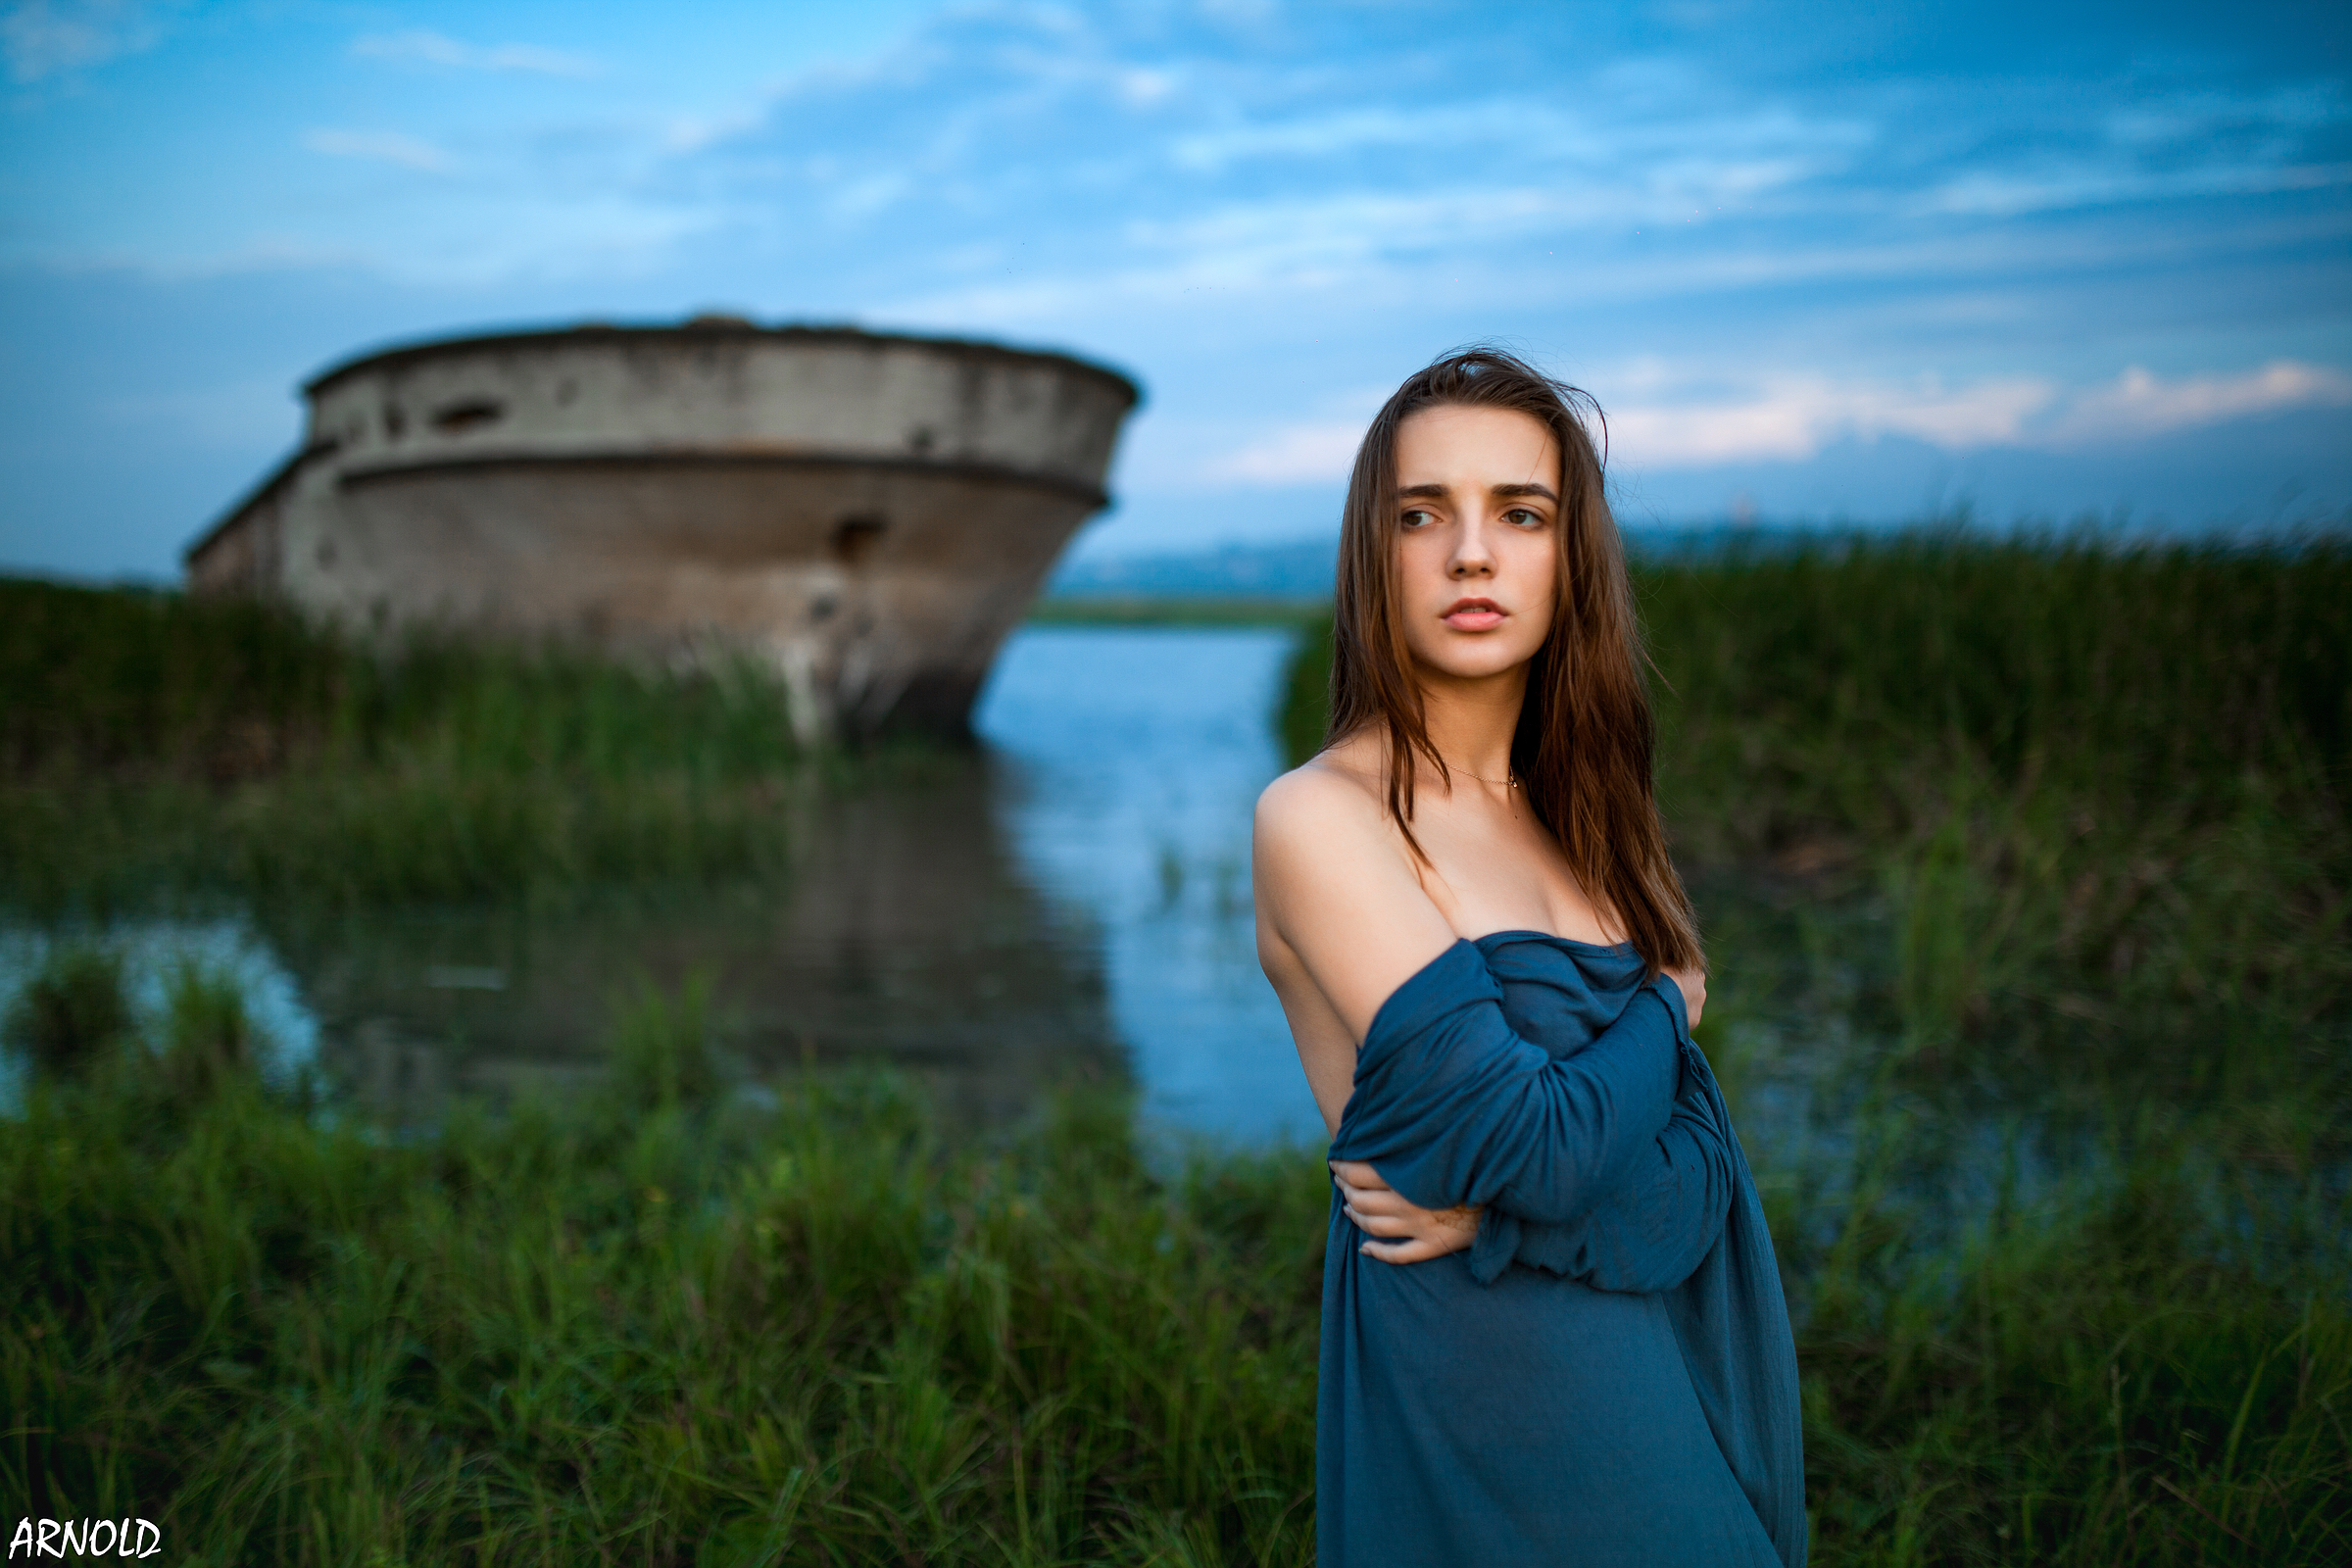 People 2400x1600 women model brunette looking away portrait outdoors depth of field topless covering boobs arms crossed necklace water grass ship sky women outdoors